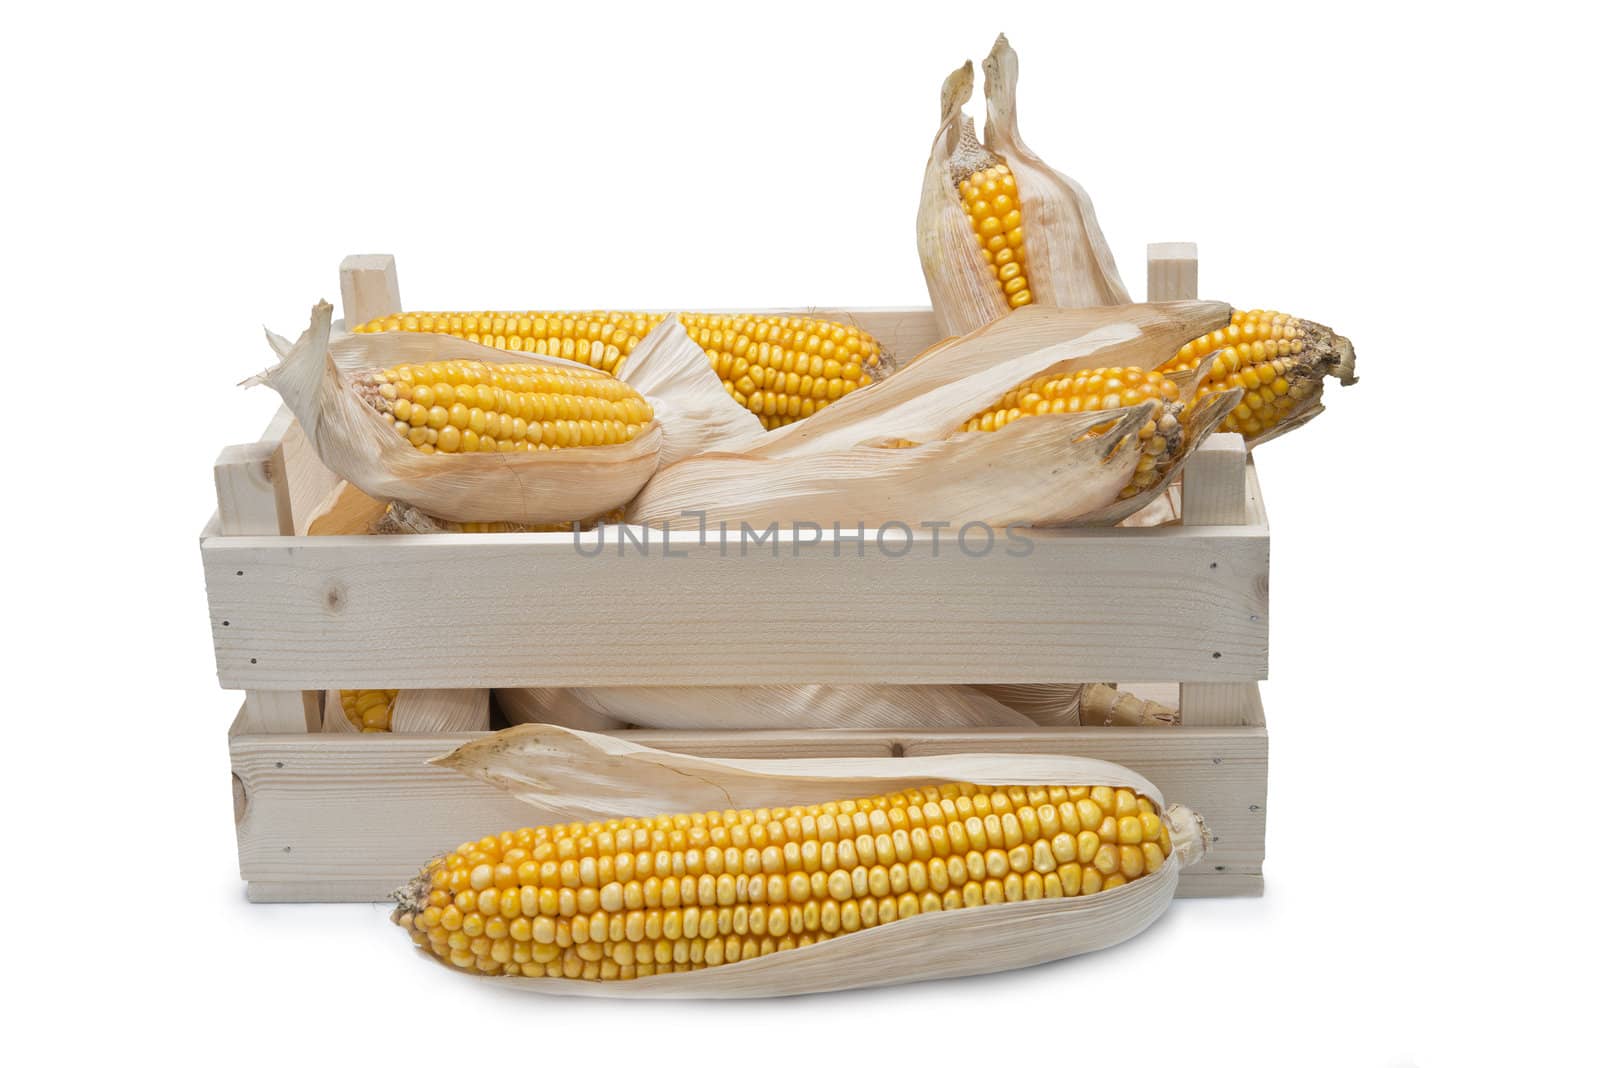 Wooden crate full of corn ears isolated on a white background